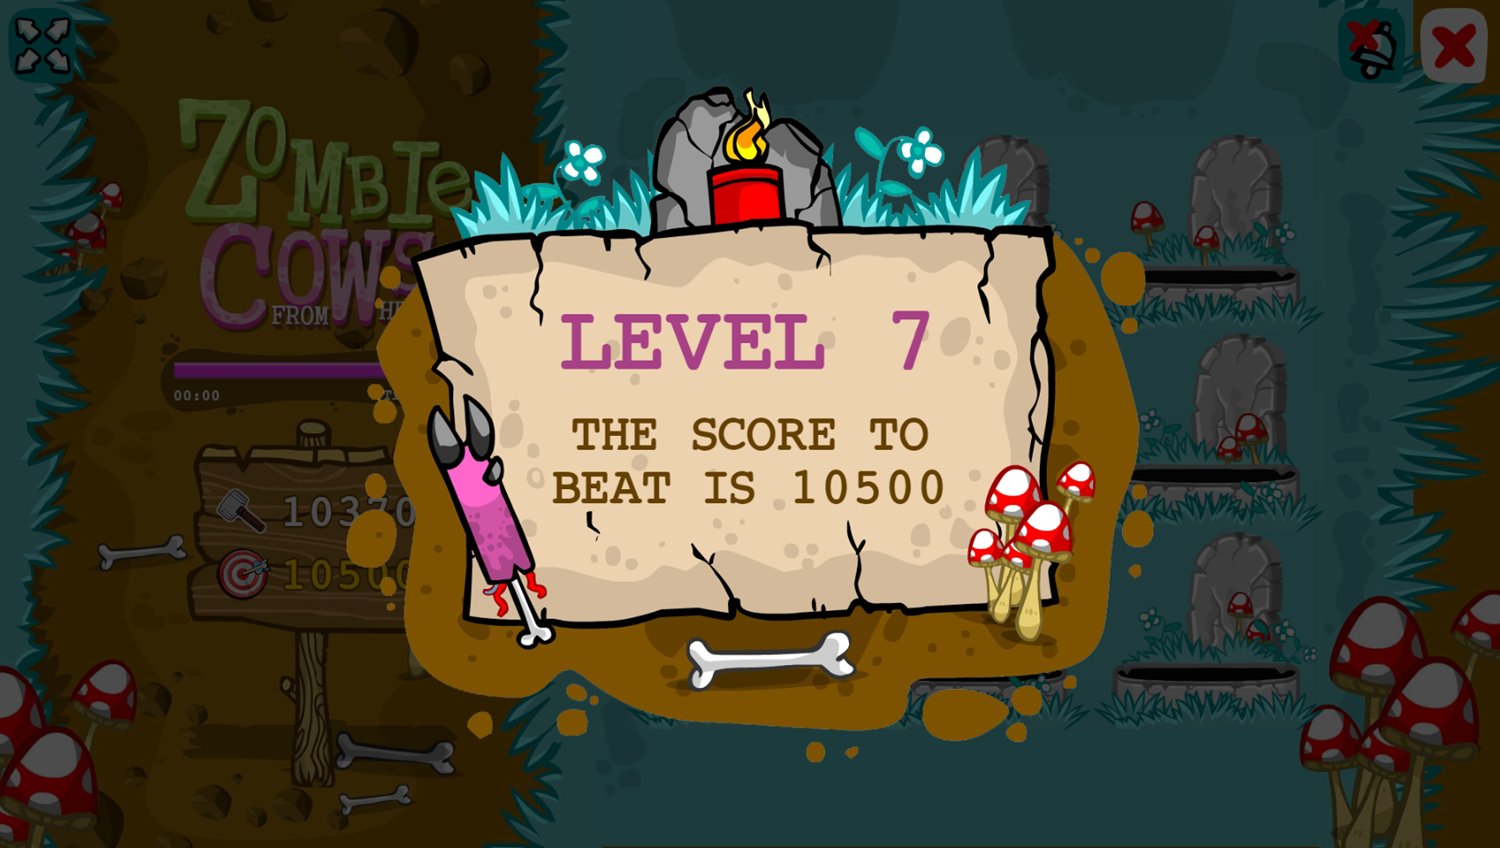 Zombie Cows From Hell Game Level 7 Goal Screenshot.